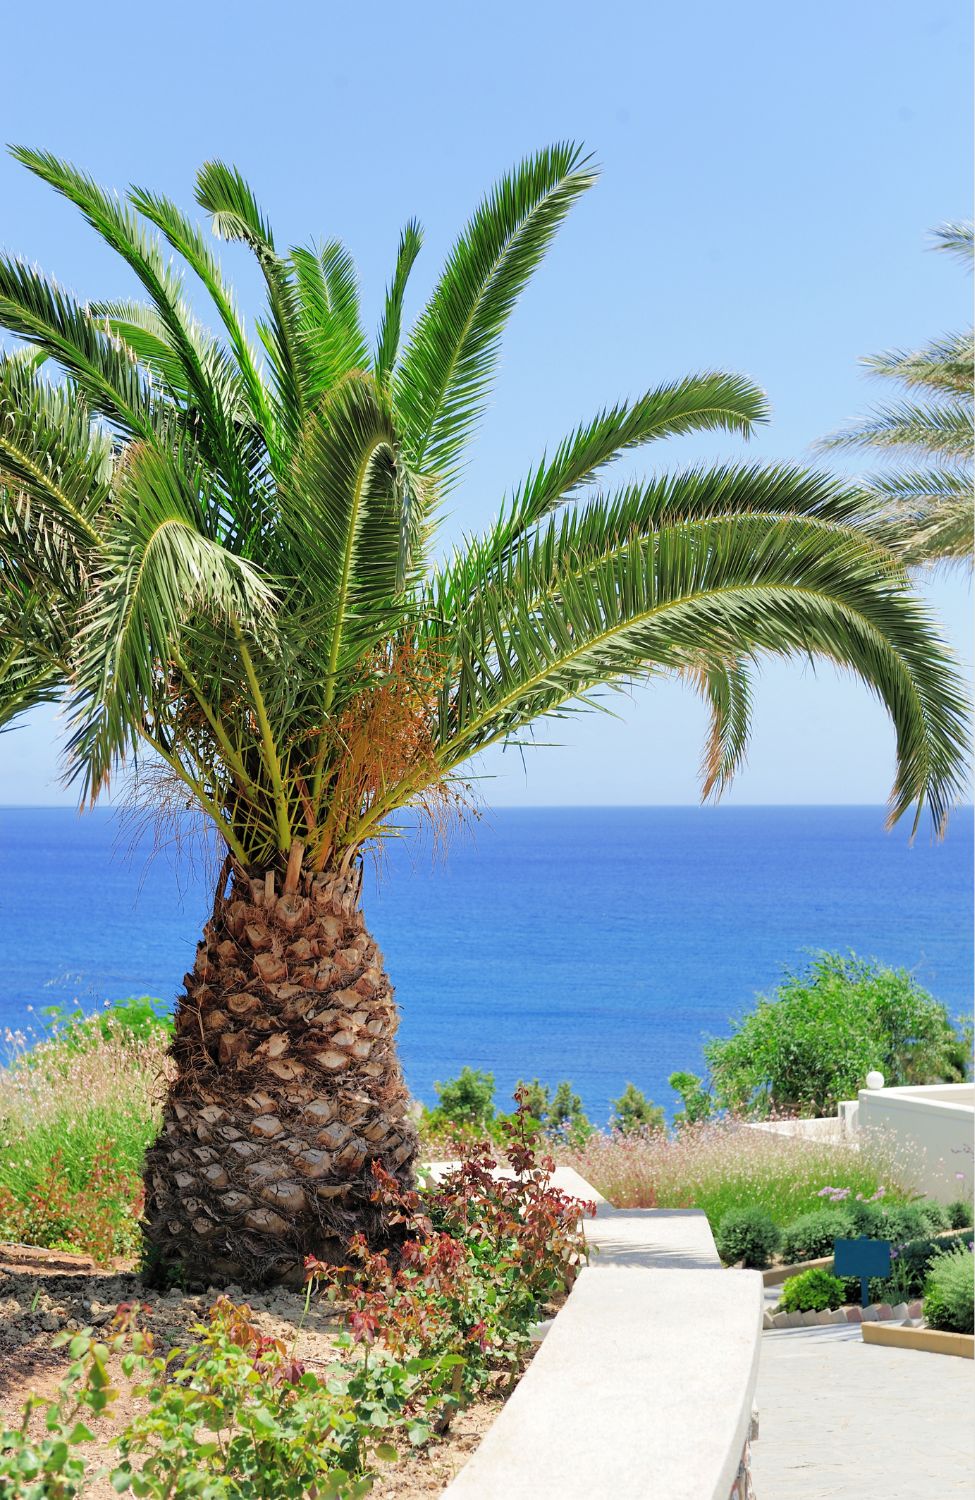 Grow Your Own Palm Trees with Phoenix Canariensis Seeds - Order Now and Start Your Gardening Adventure!